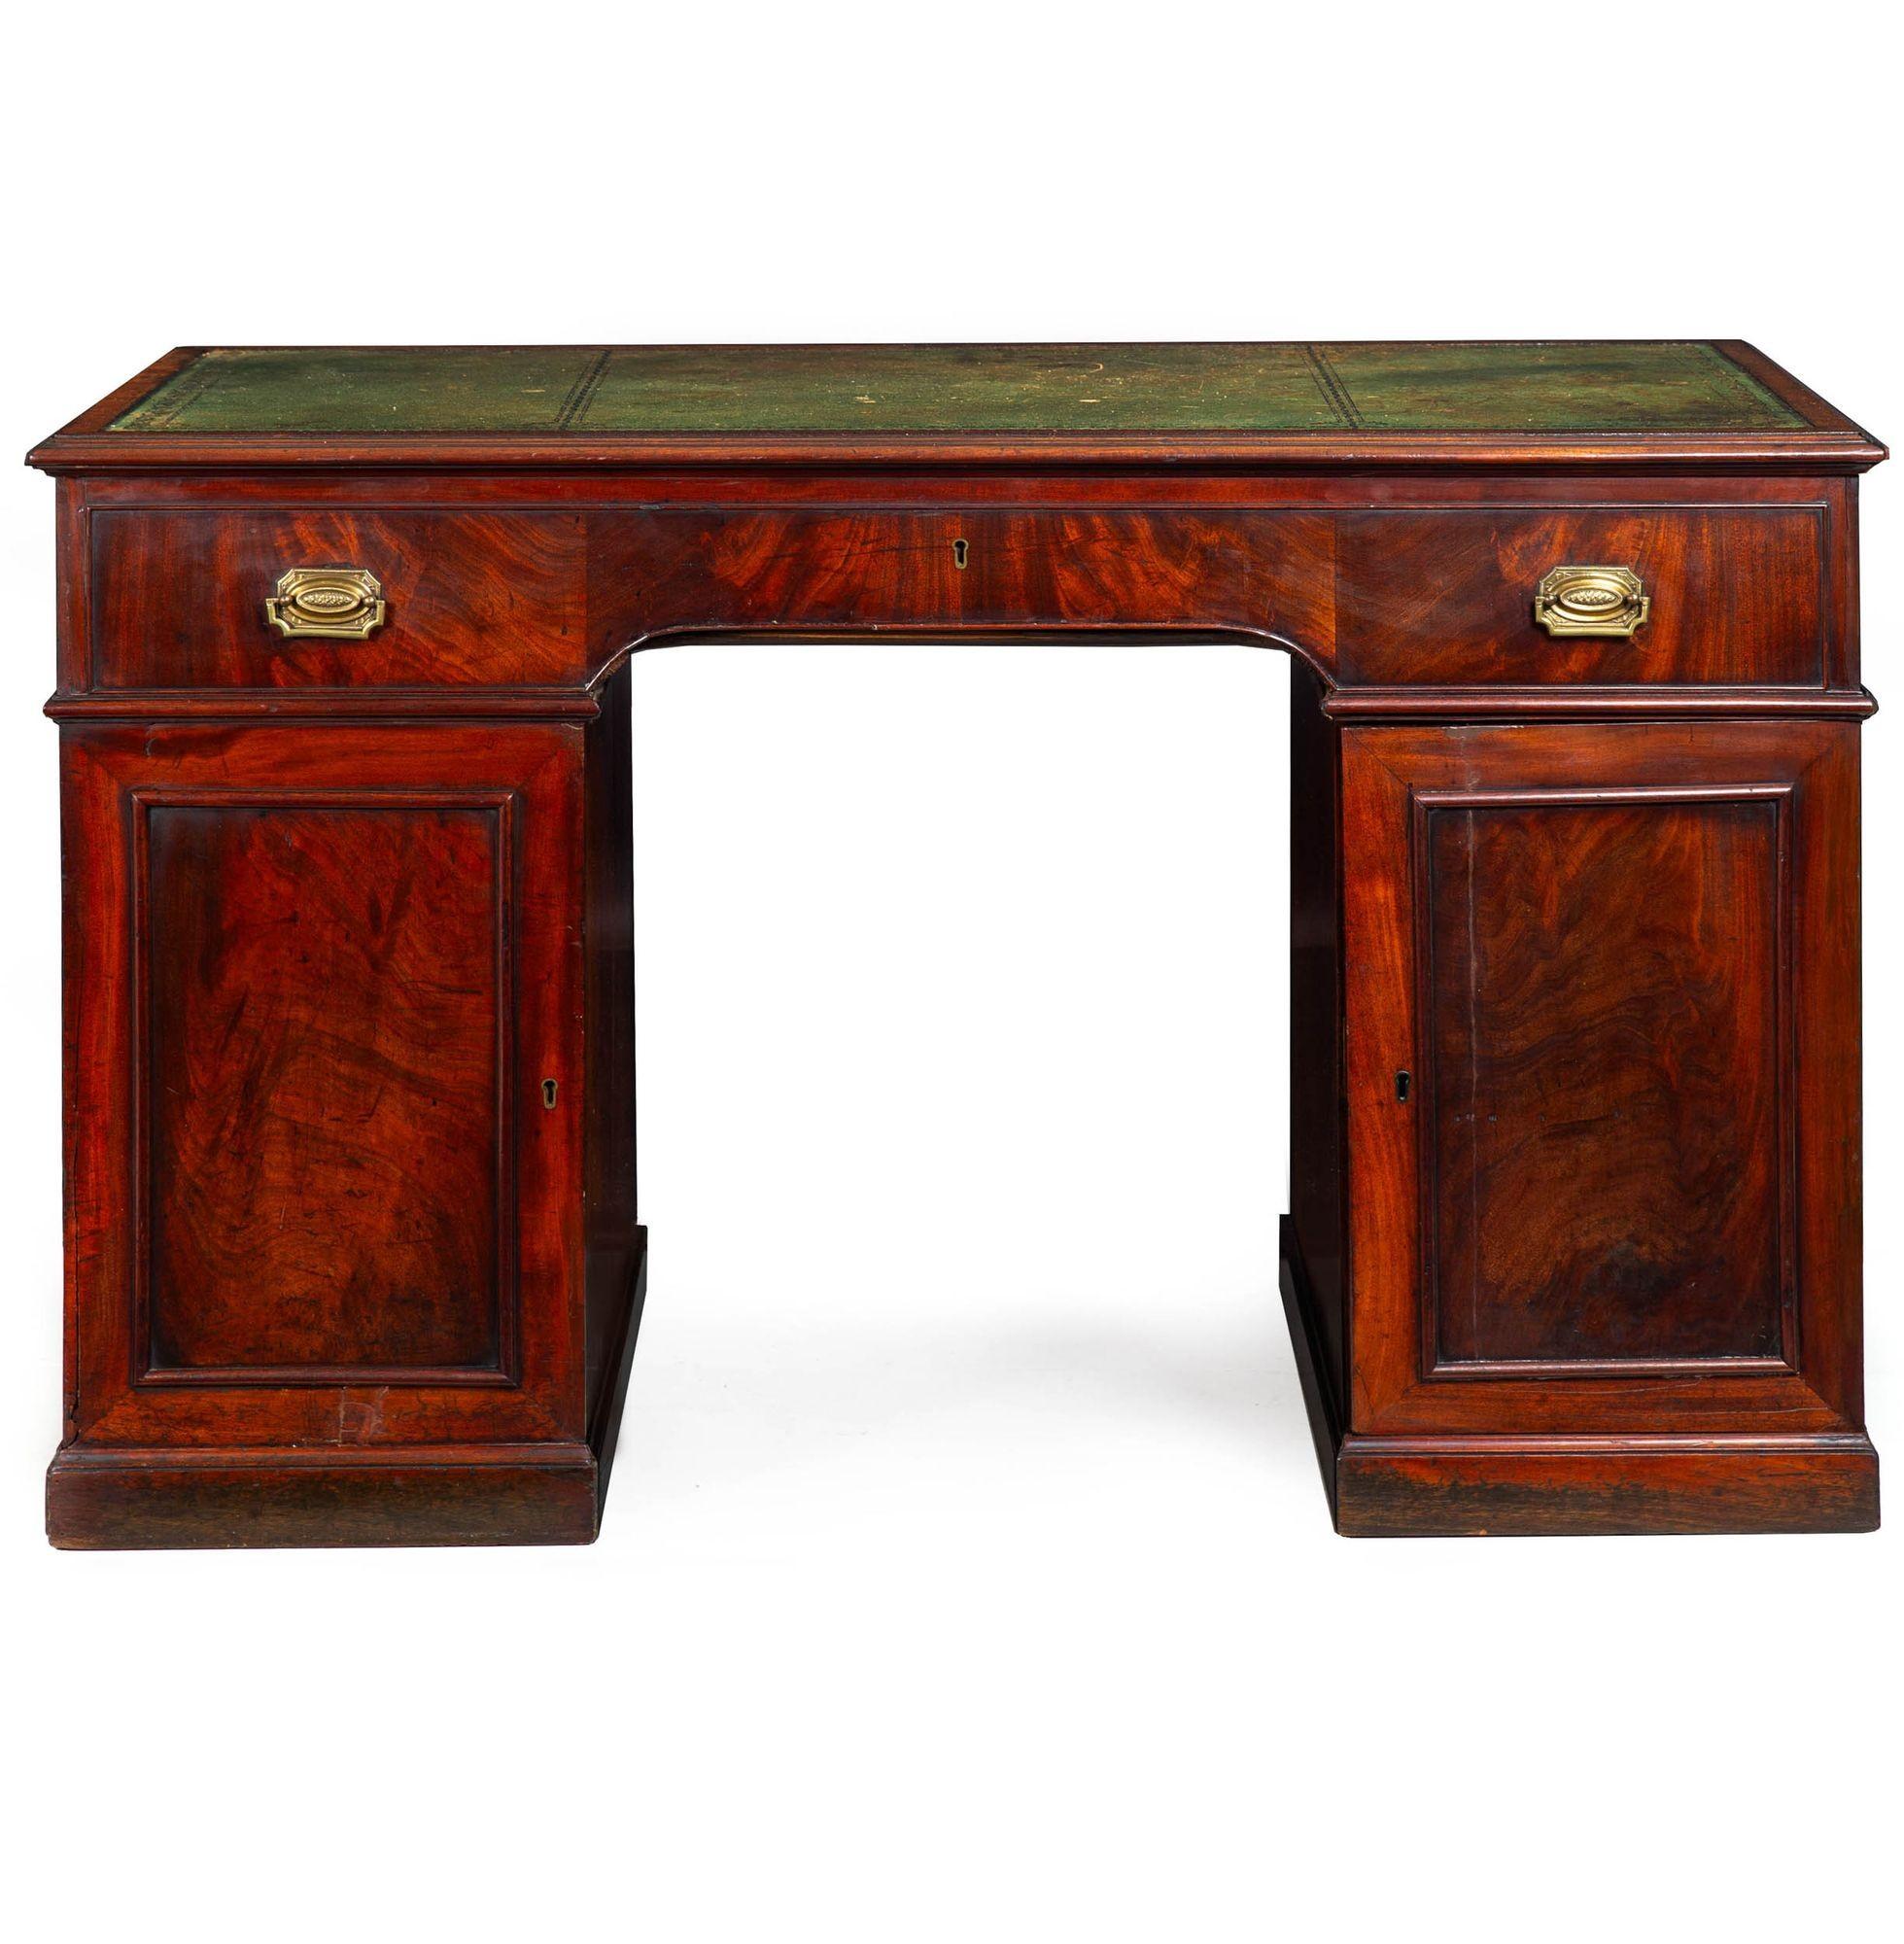 English George III Mahogany & Leather Pedestal “Rent” Writing Desk ca. 1800 In Good Condition For Sale In Shippensburg, PA